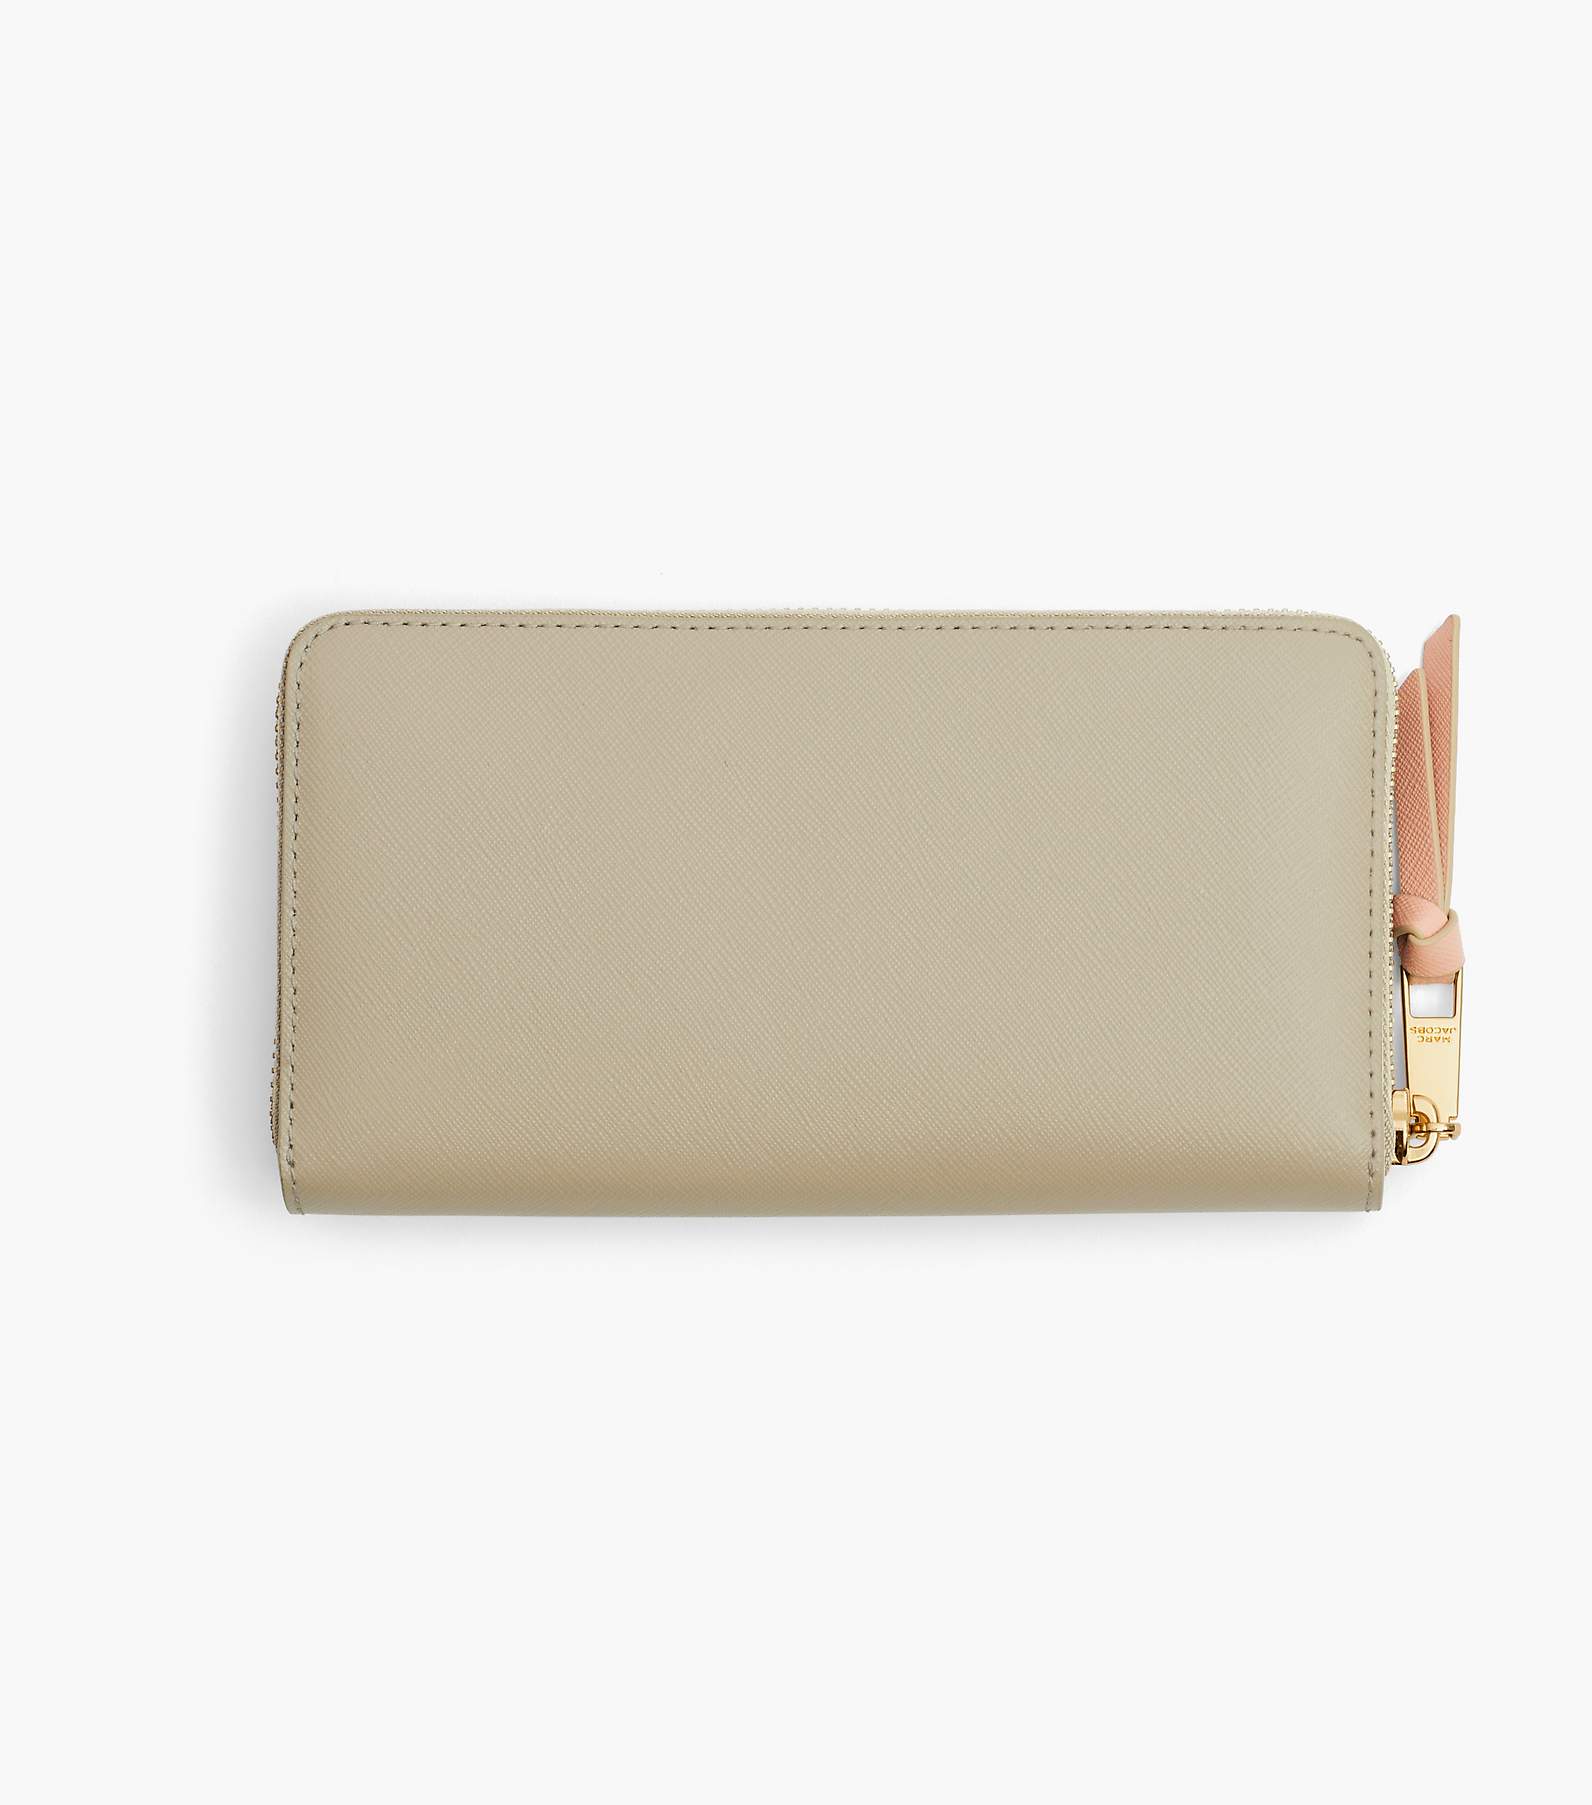 Marc Jacobs The Utility Snapshot Long Wallet in Black